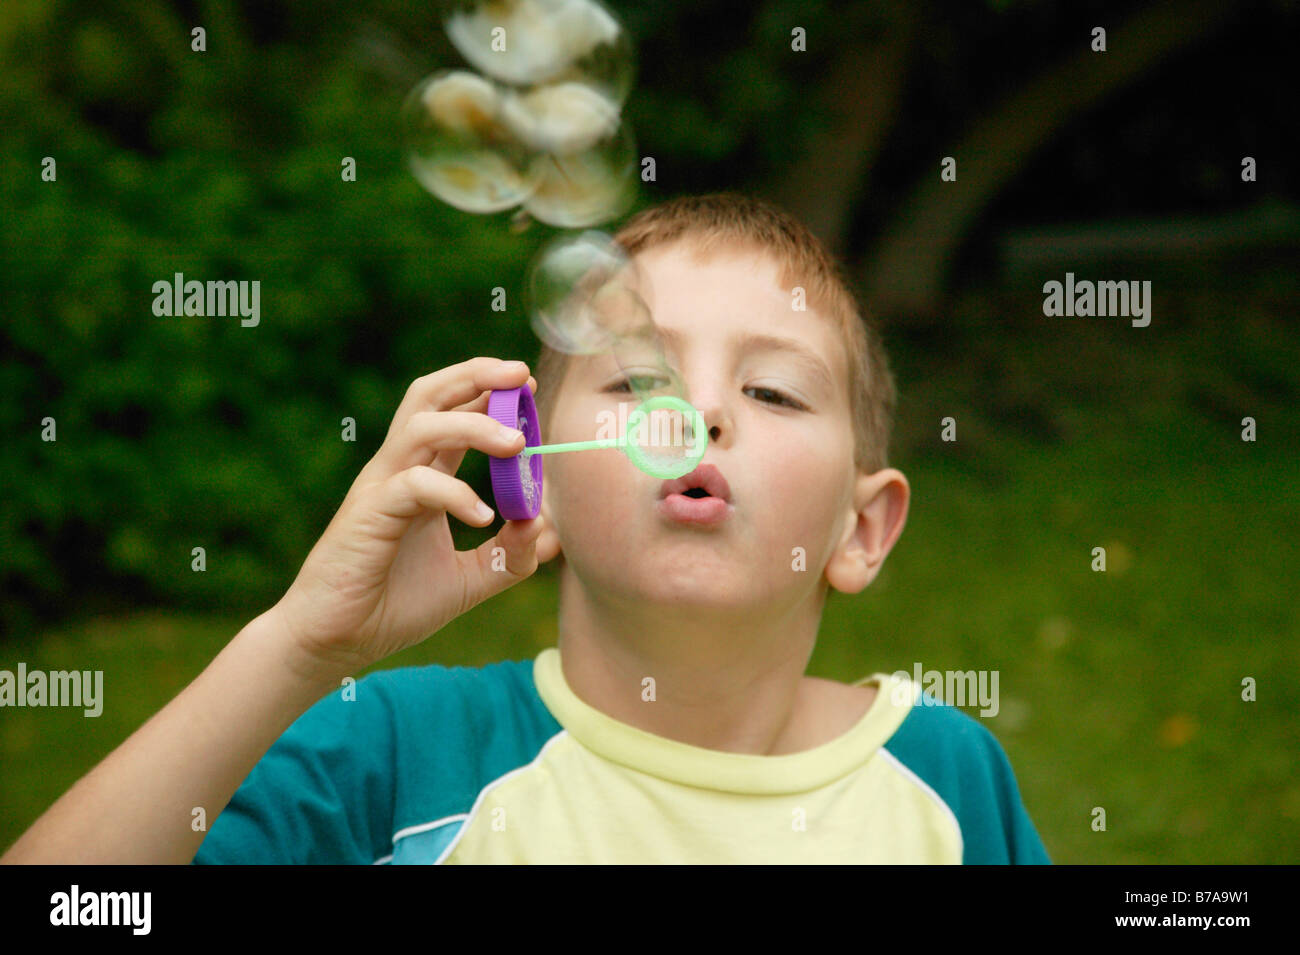 A Young Child Blowing Bubbles Model Released Stock Photo Alamy